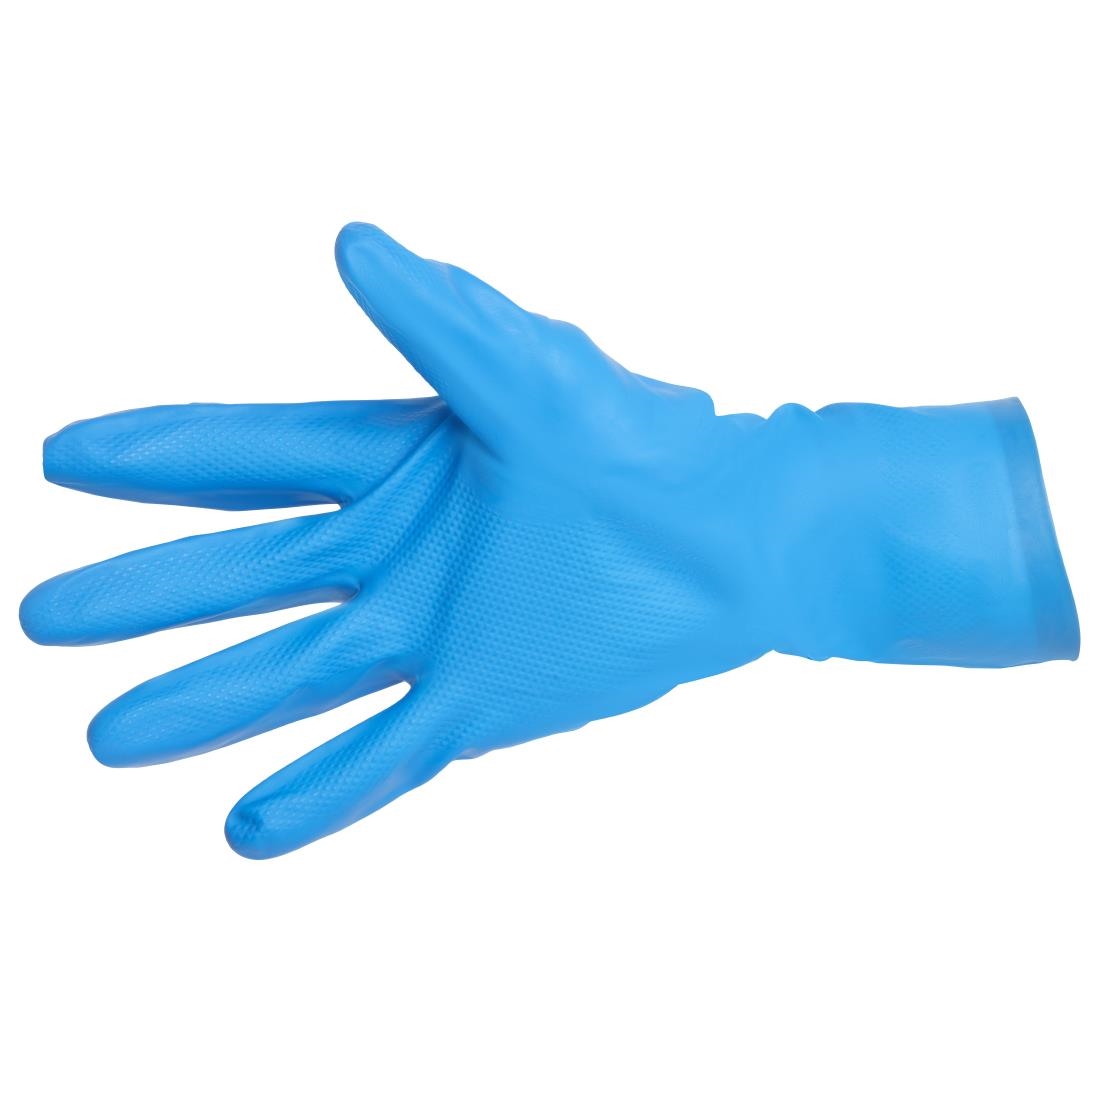 MAPA Ultranitril 475 Liquid-Proof Food Handling and Janitorial Gloves Blue Extra Large